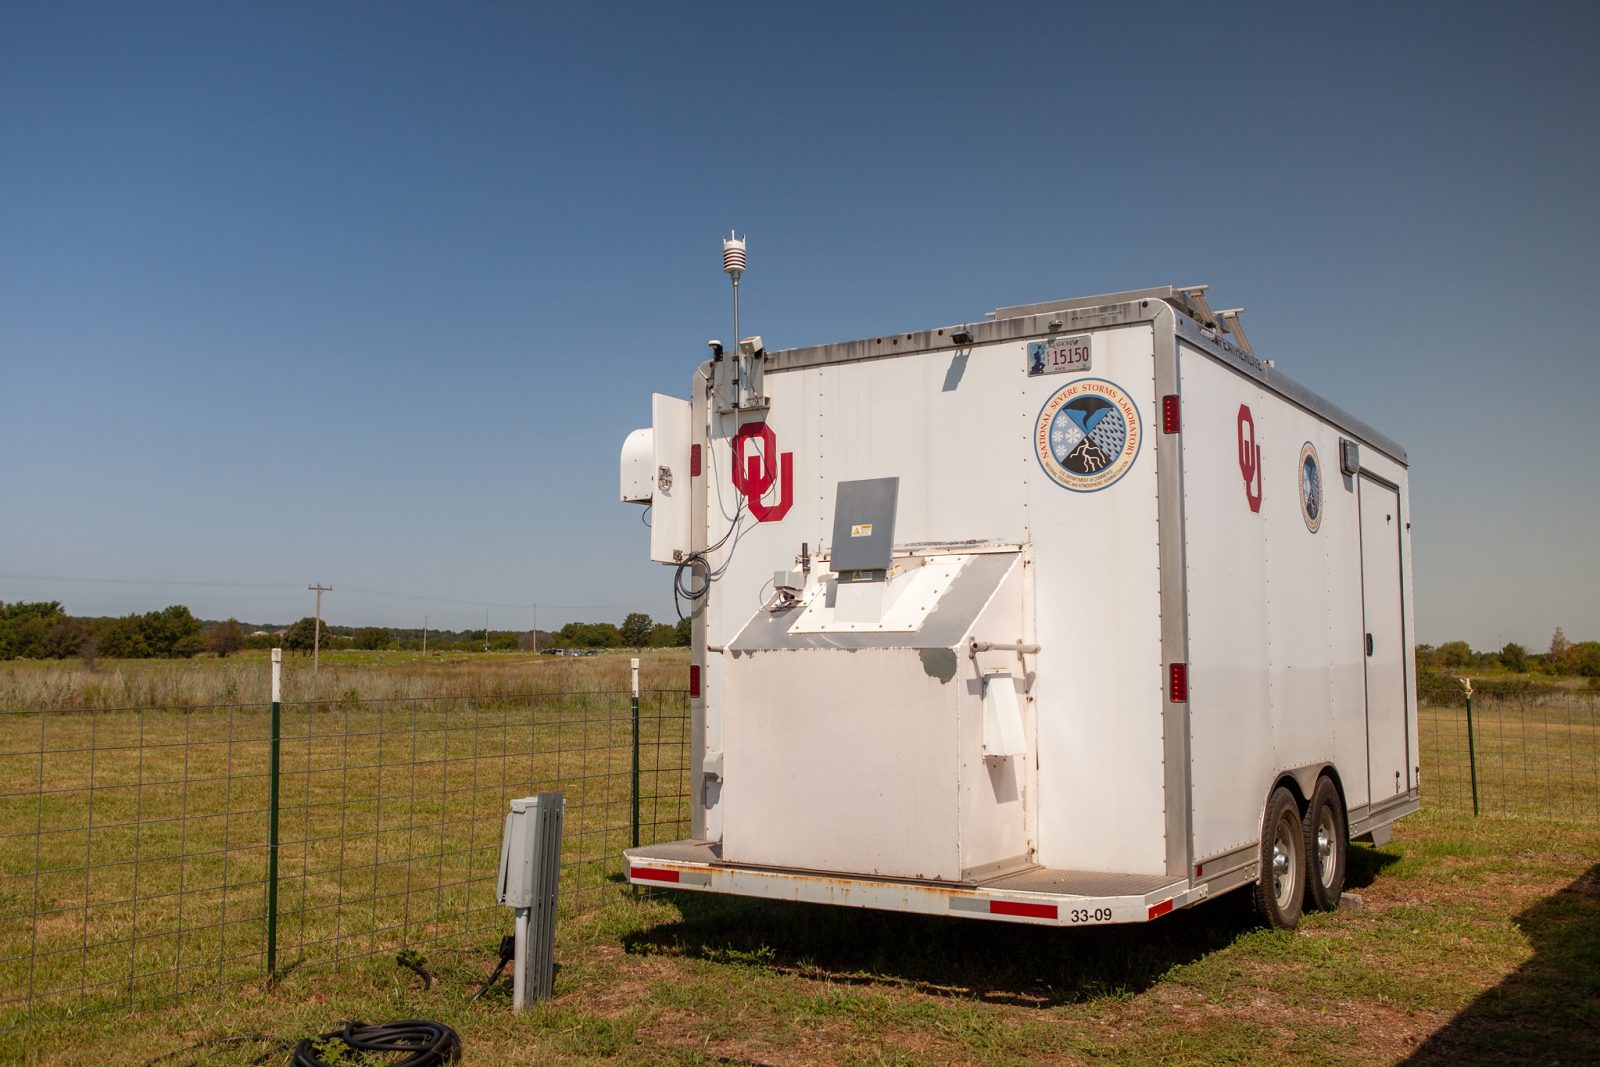 The Collaborative Lower Atmospheric Mobile Profiling System